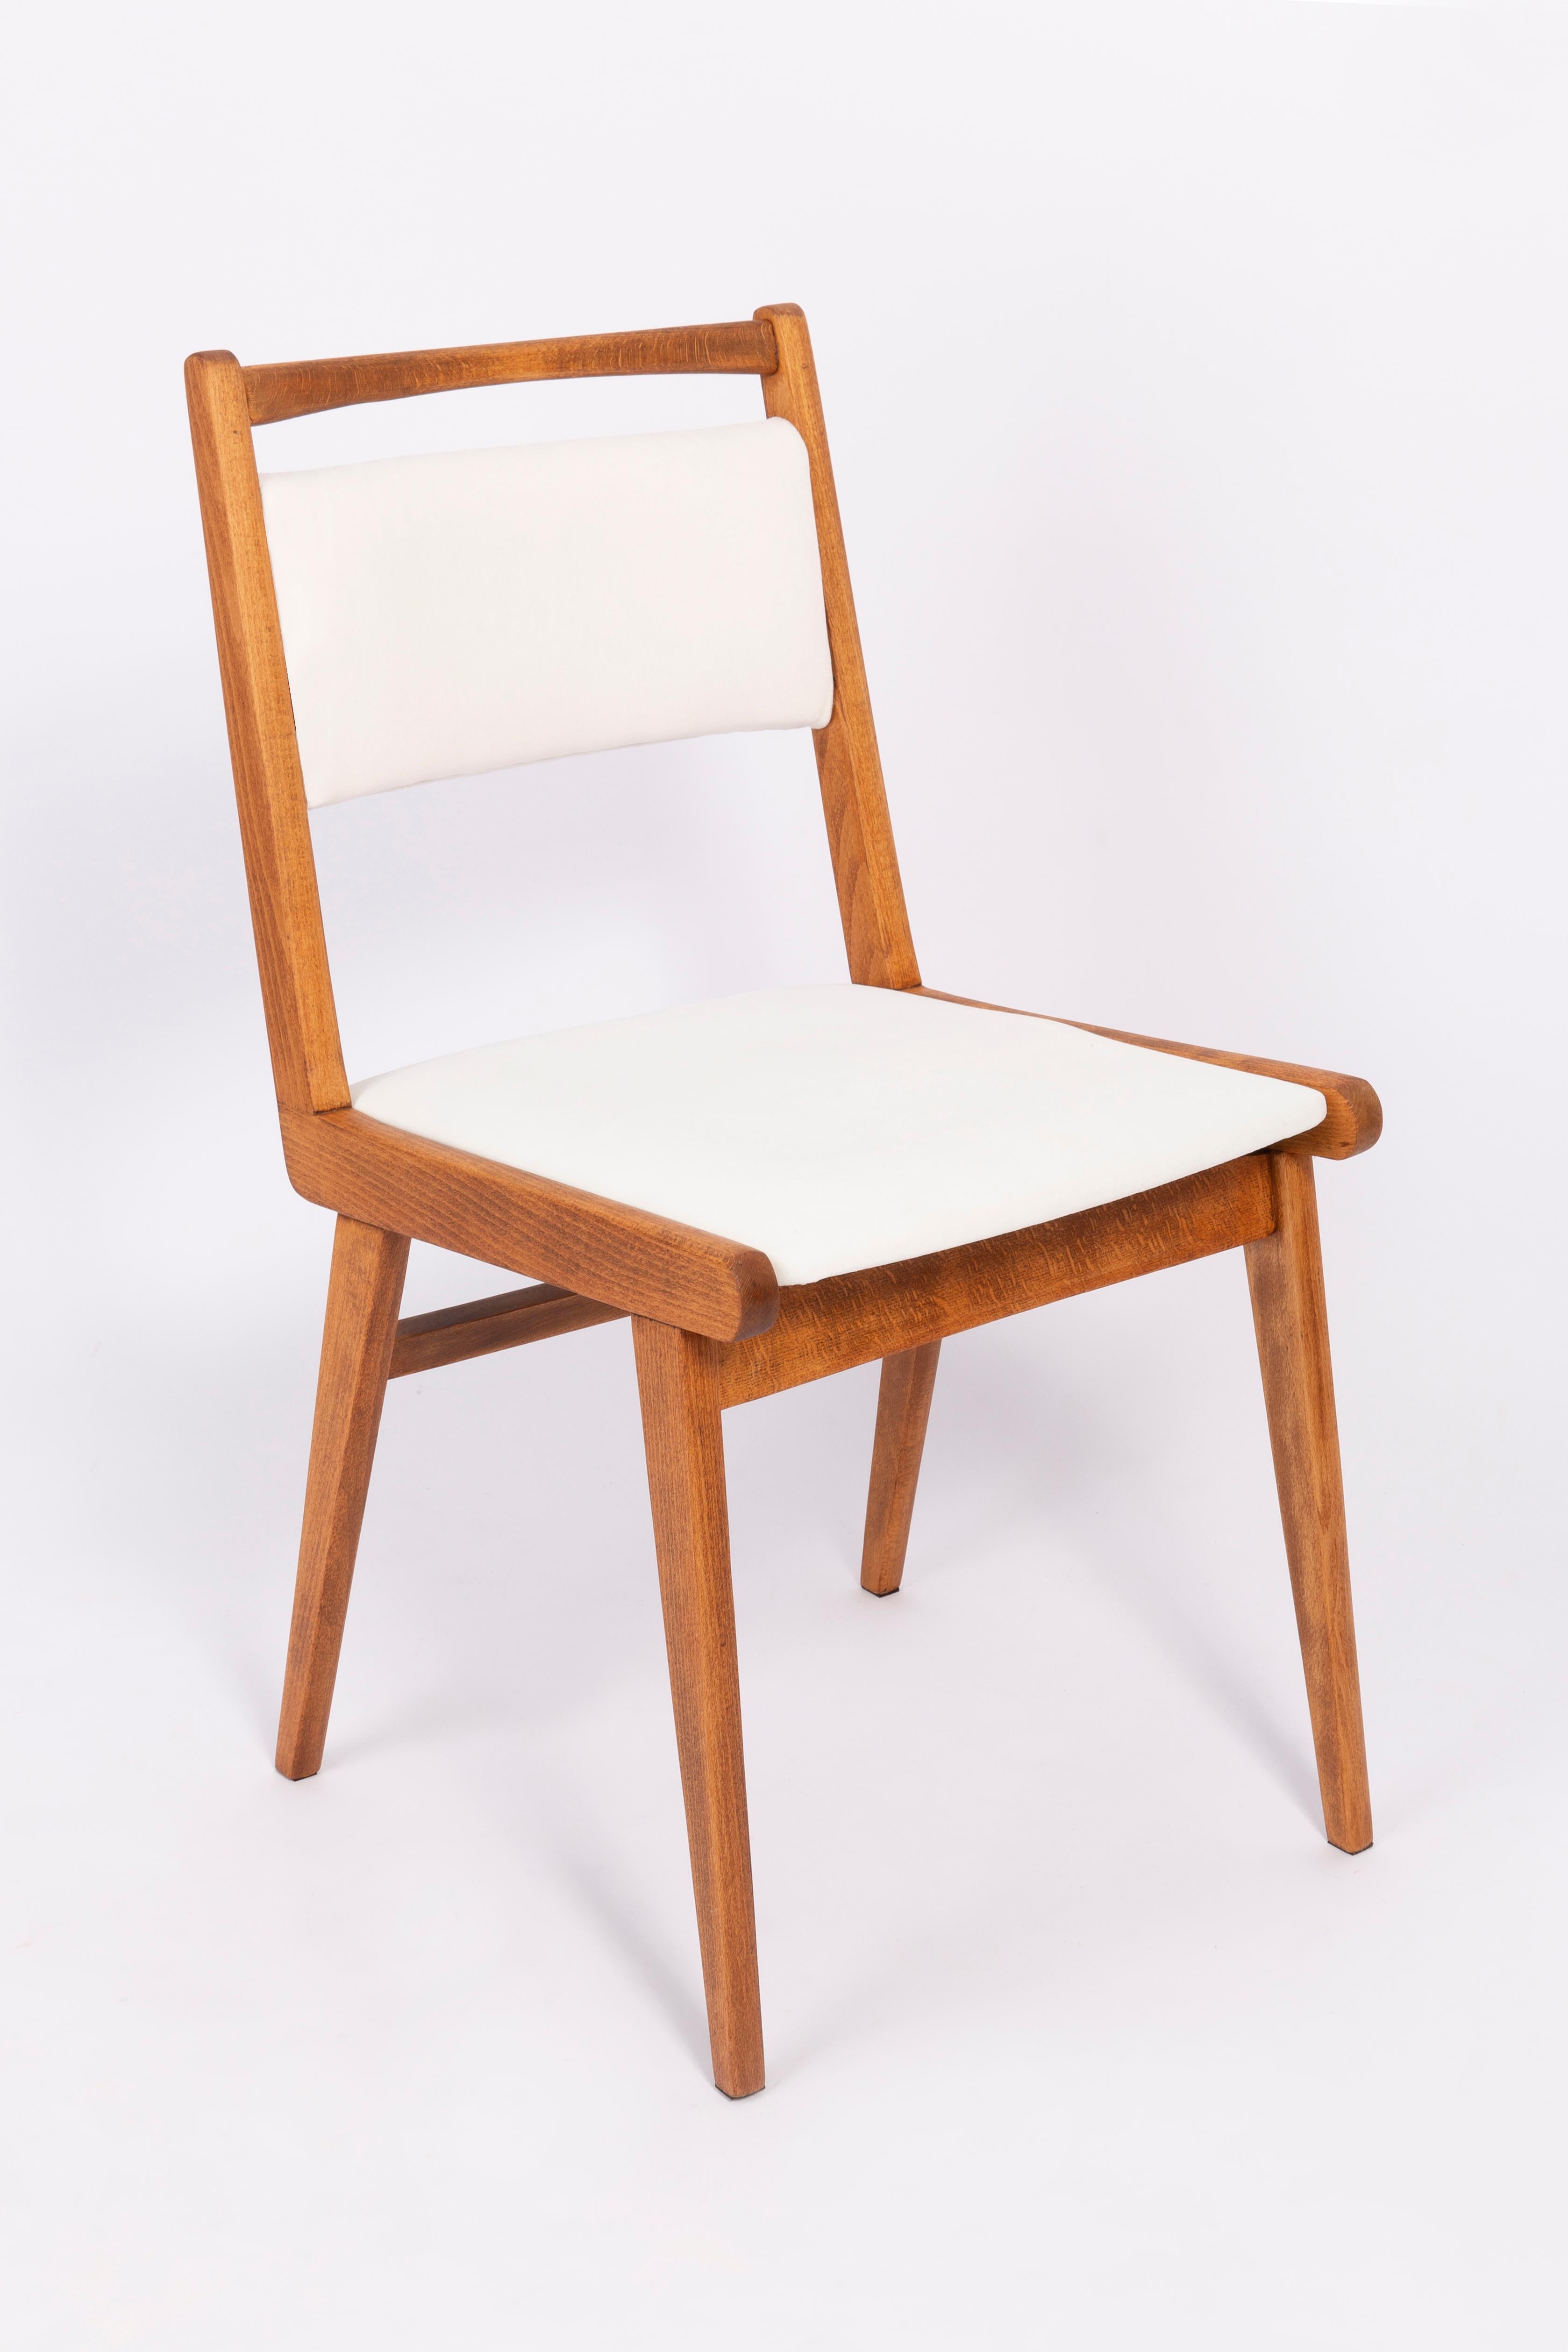 Chair designed by Prof. Rajmund Halas. It is JAR type model. Made of beechwood. Chair is after a complete upholstery renovation, the woodwork has been refreshed. Seat and back is dressed in a white, durable and pleasant to the touch velvet fabric.